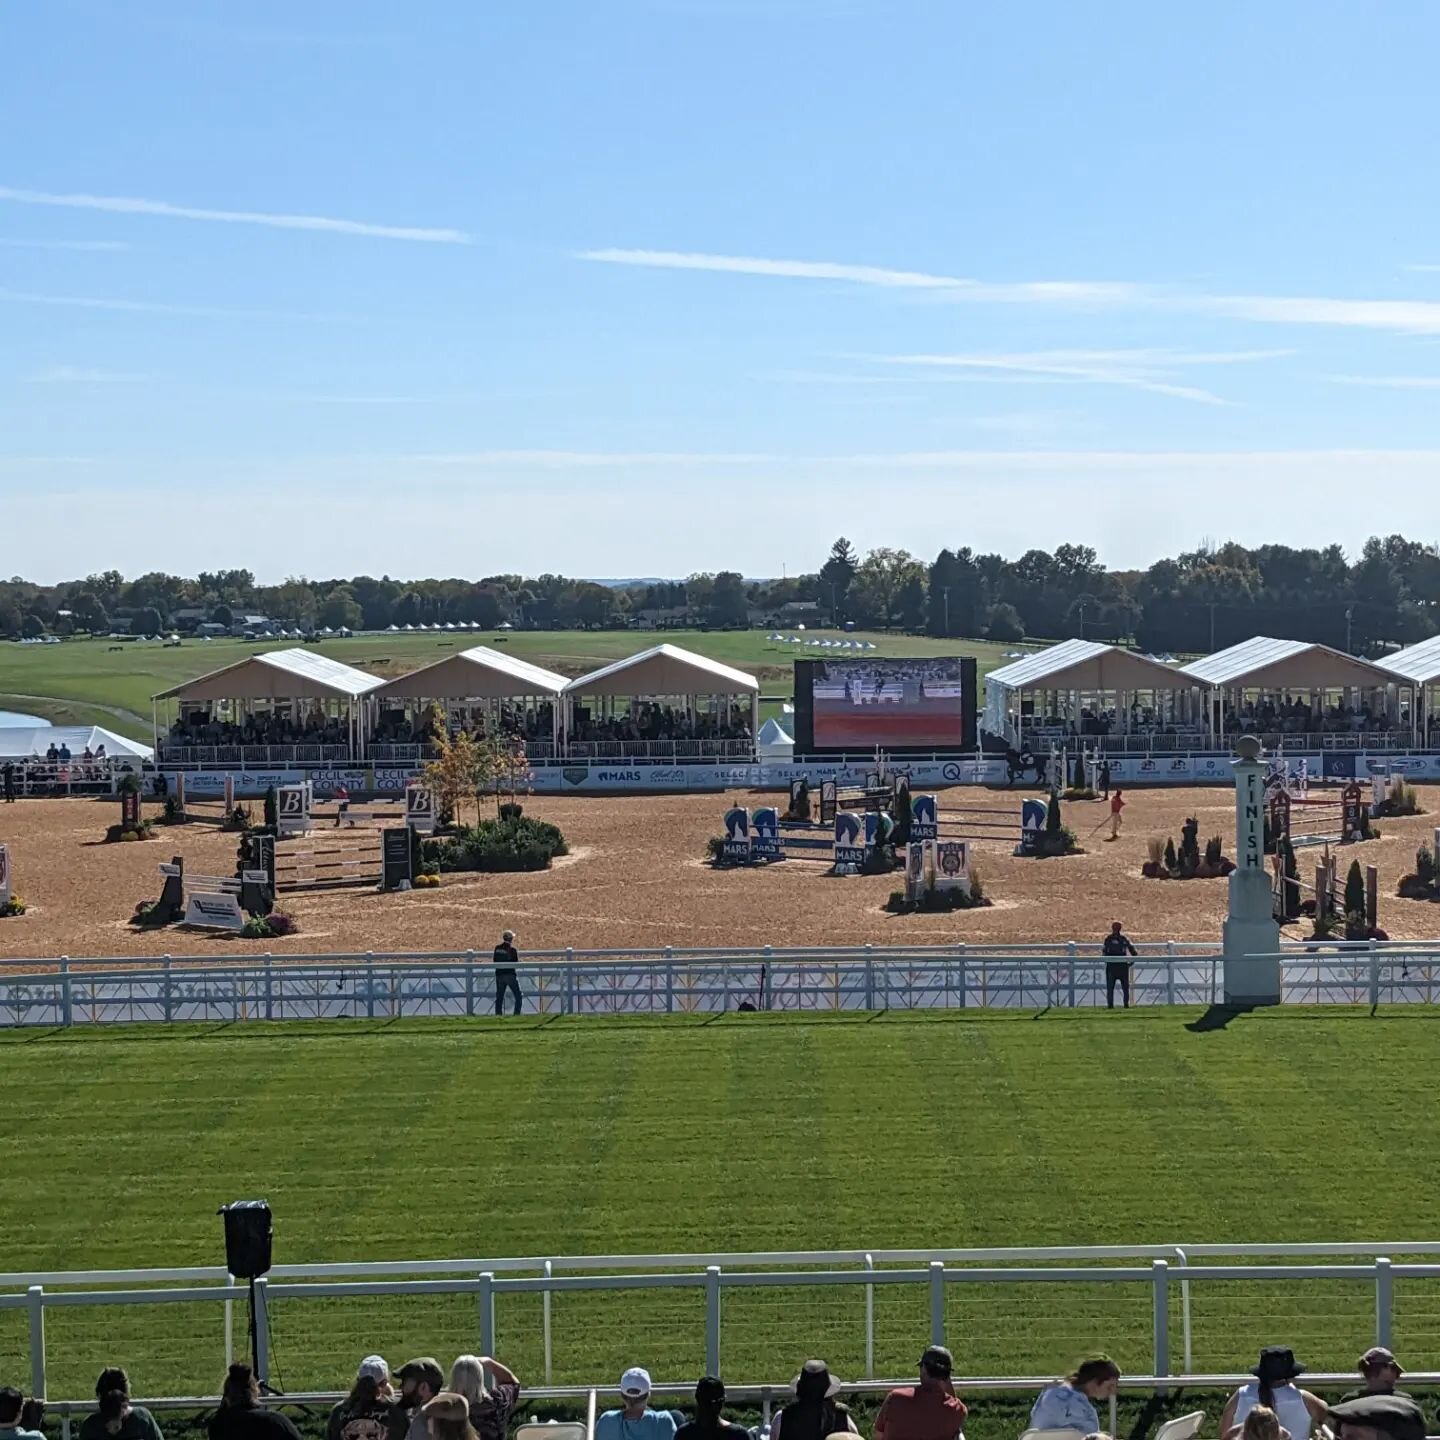 Horse Showjumping and Corgi racing adventures this weekend. It was a spectacle to be seen!